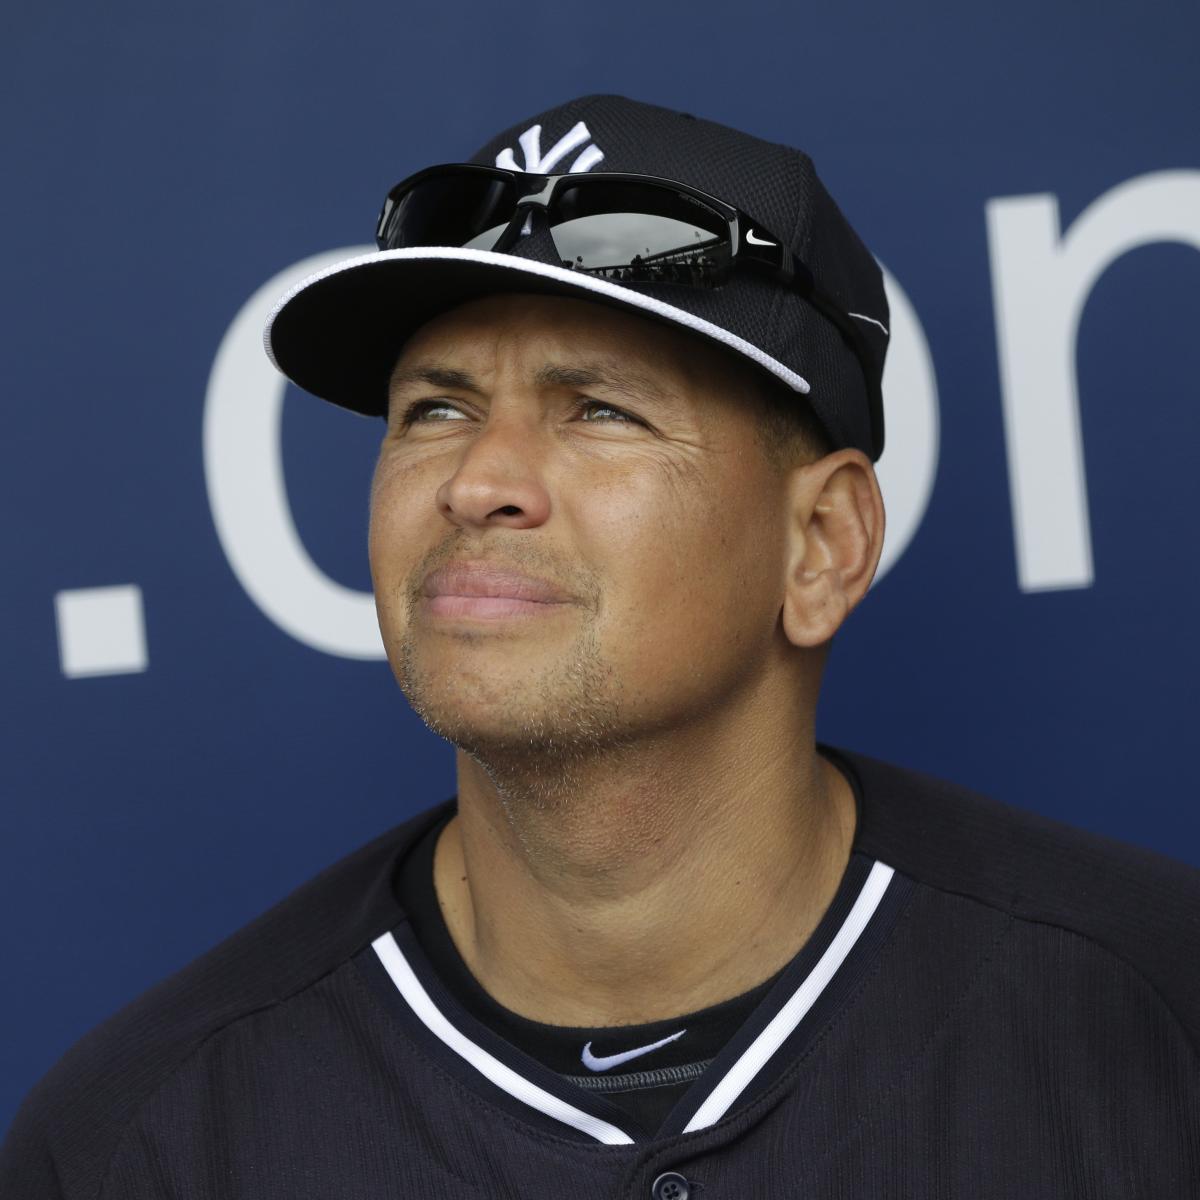 Alex Rodriguez on Hall of Fame Candidacy 'I Pray I Get In' Despite PED